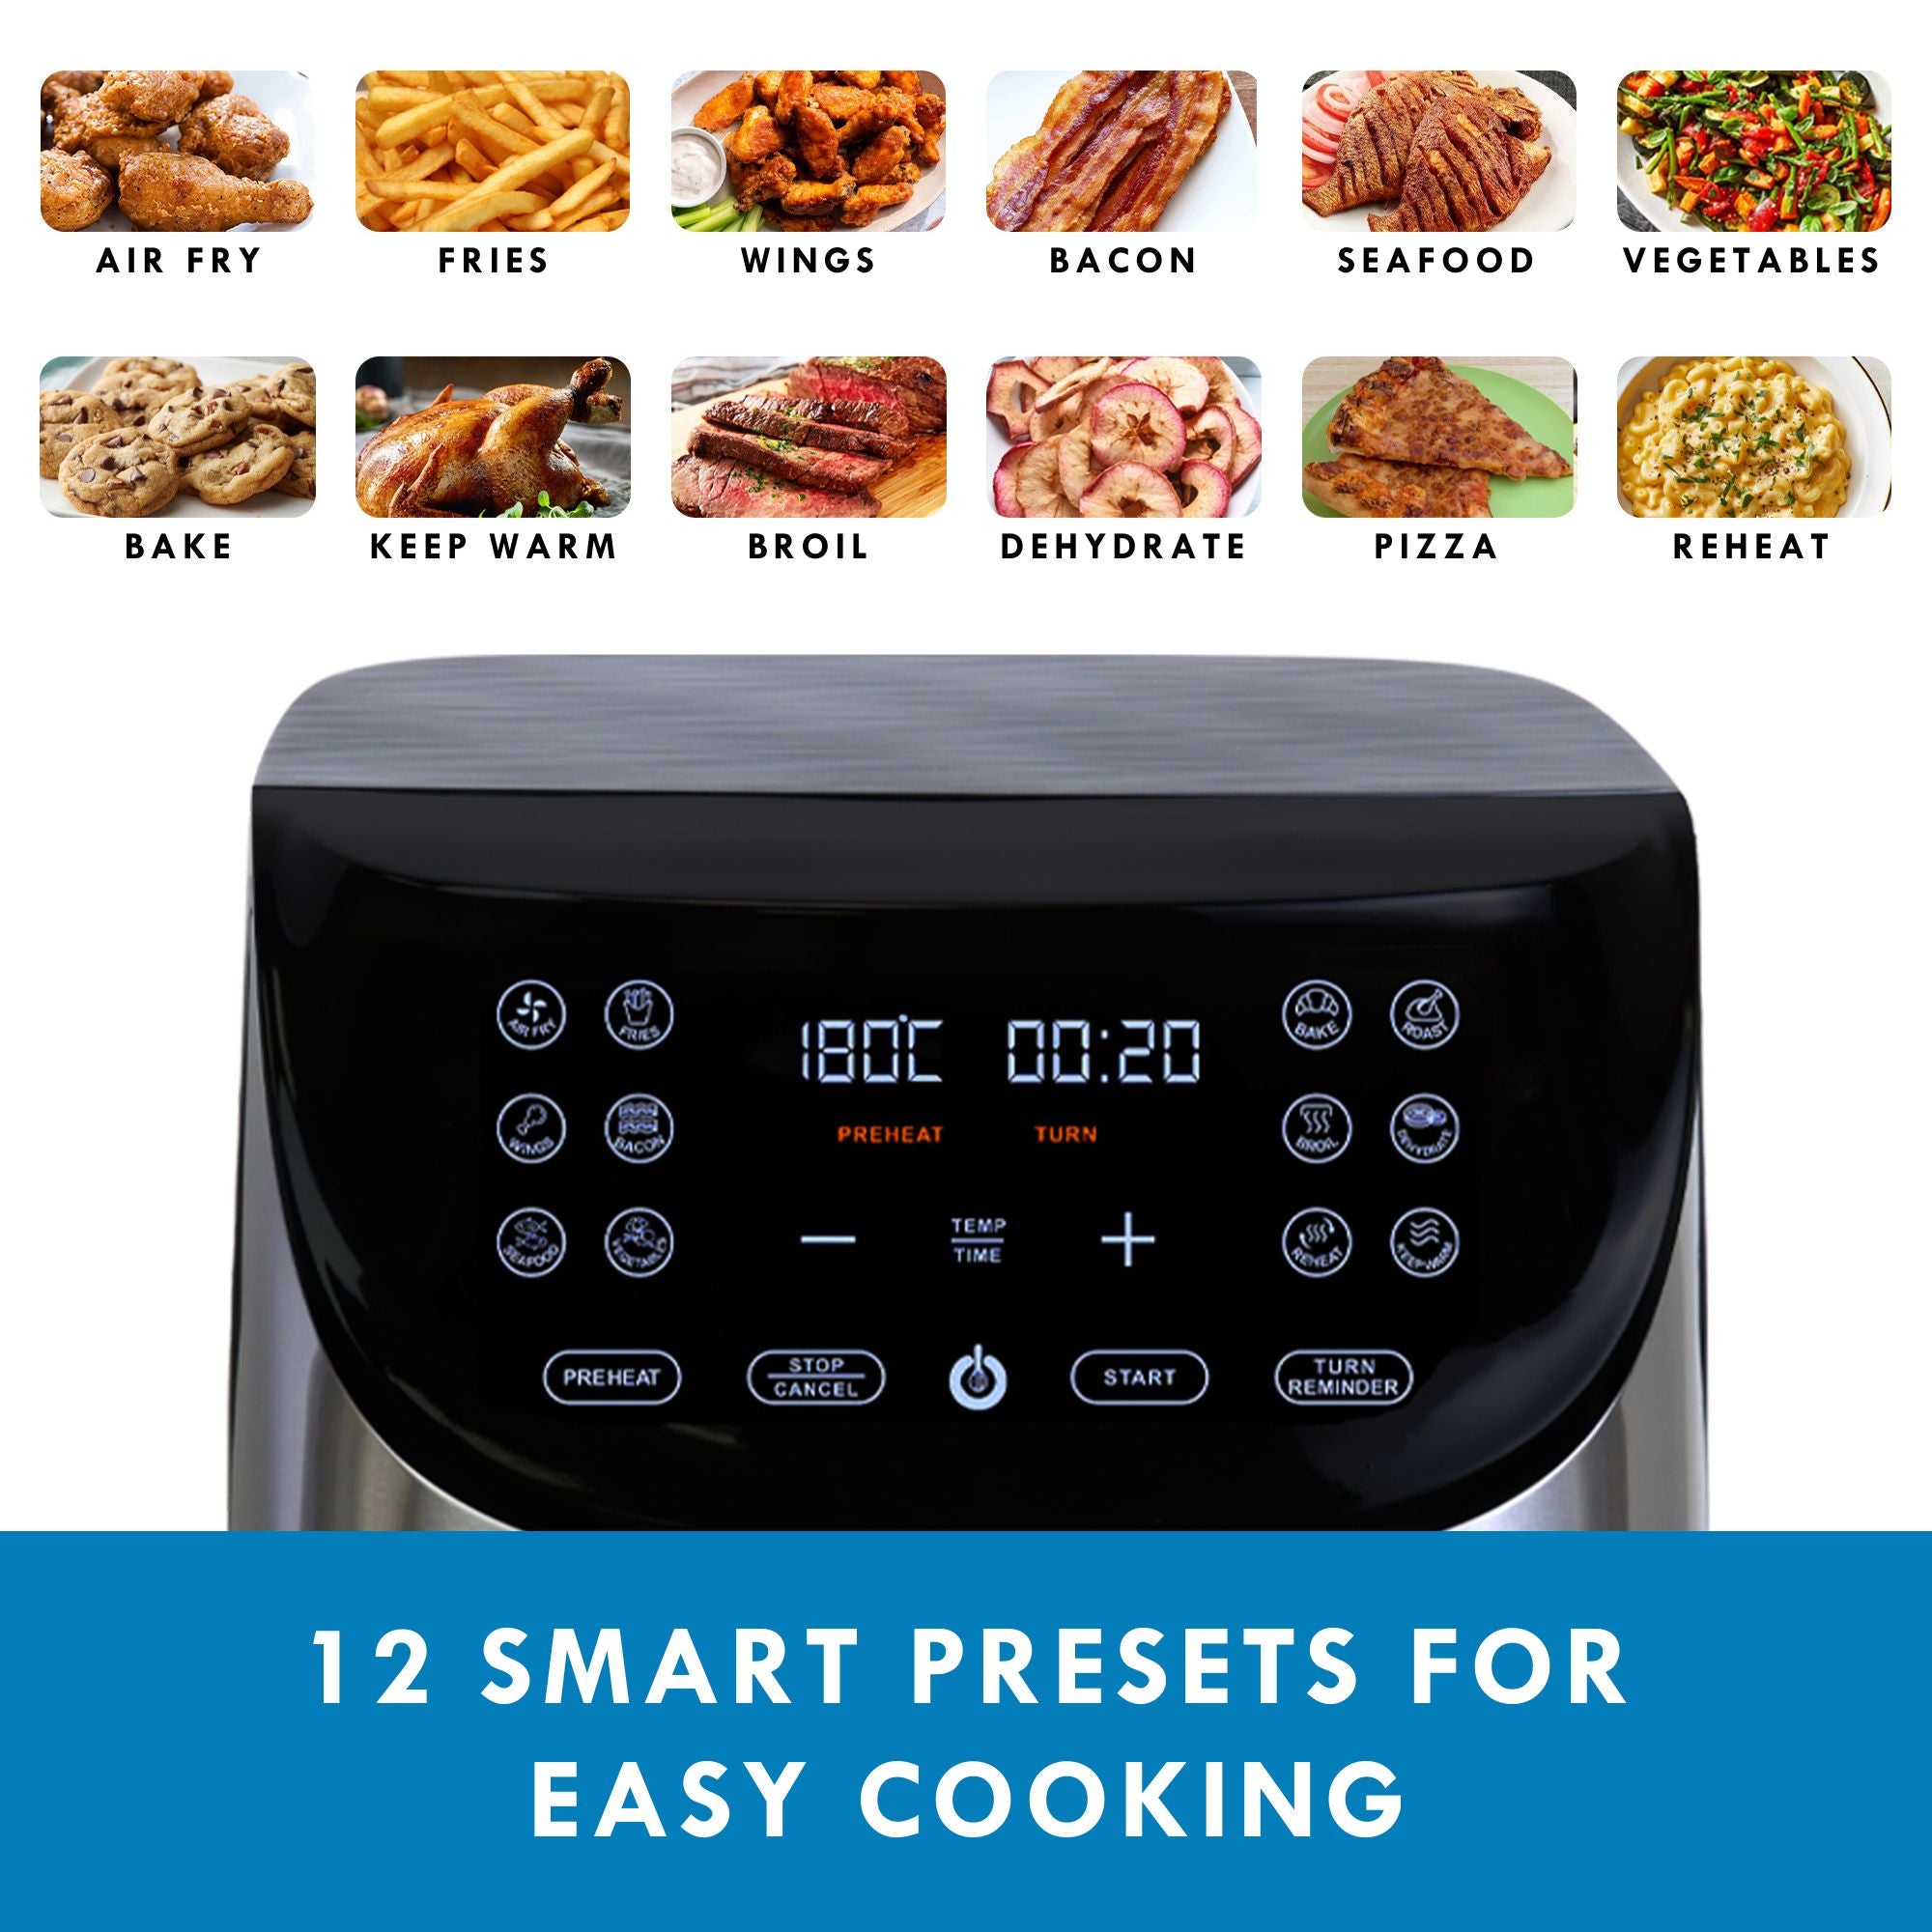 Closeup of the air fryer's digital control panel display screen with small labeled pictures above showing the 12 programs: Airfry, Fries, Wings, Bacon, Seafood, Vegetables, Bake, Keep Warm, Broil, Dehydrate, Pizza, Reheat. Text below reads, "12 smart presets for easy cooking." 